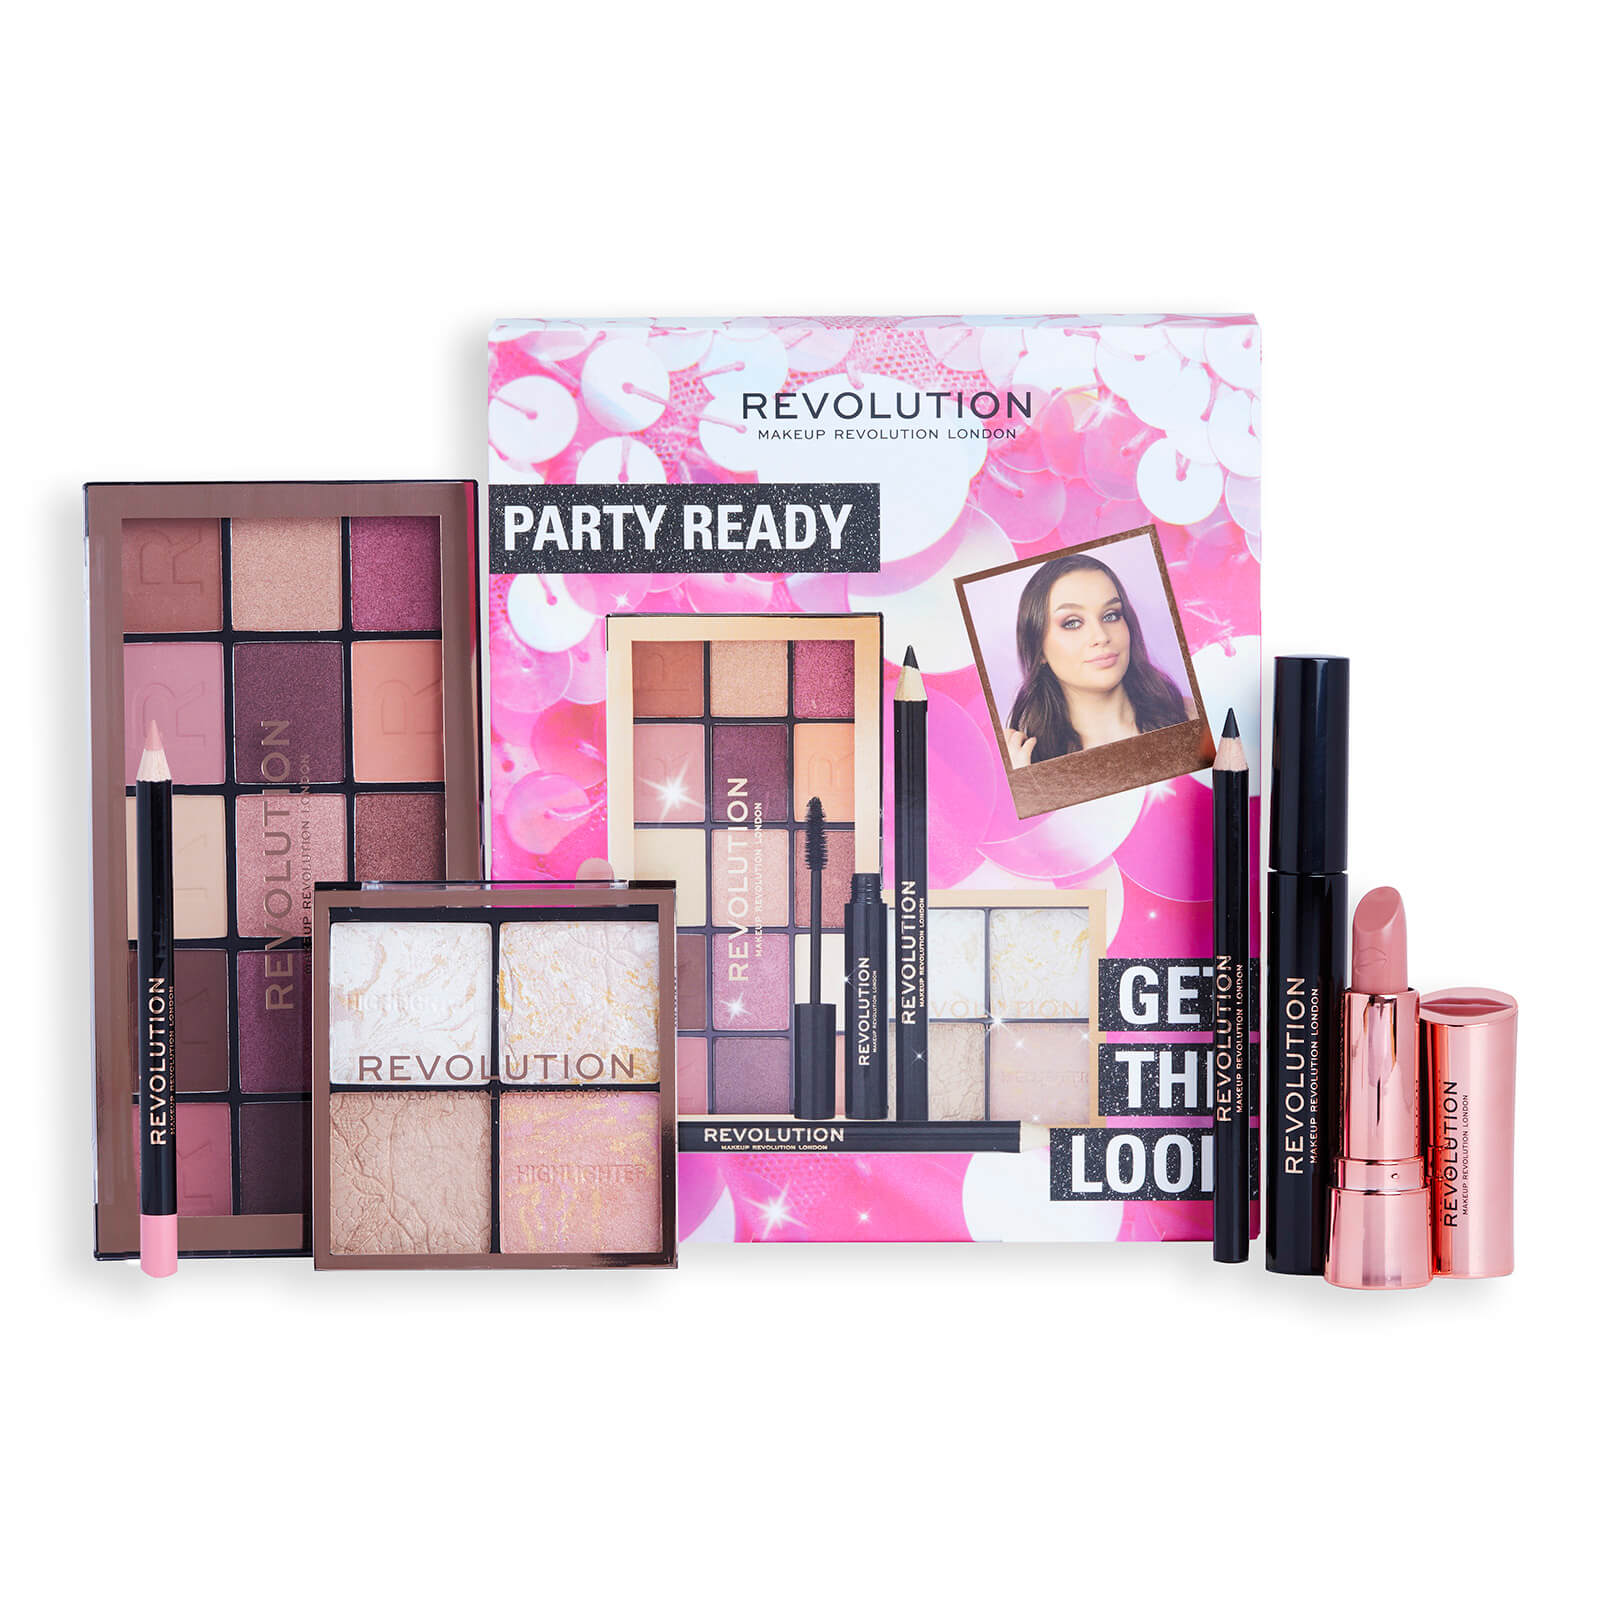 Revolution Get The Look Gift Set - Party Ready (Worth £26.99)